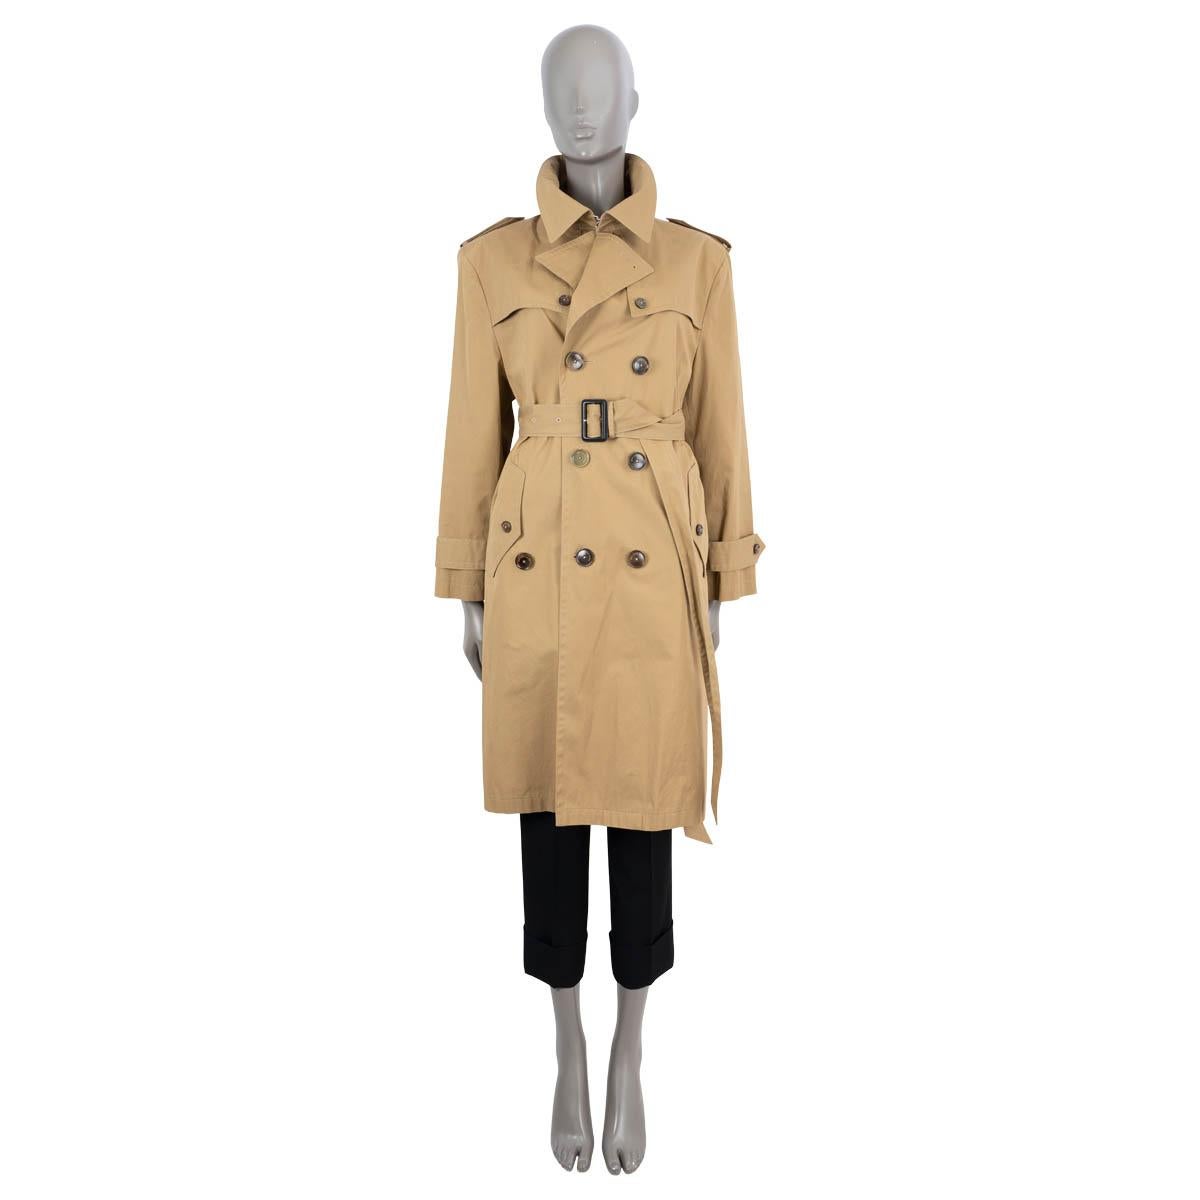 100% authentic Balenciaga Swing trench coat in tan cotton (100%). Features epaulettes, buttoned front pockets and straps on the cuffs. Closes with buttons and a belt. Partially lined in cupro. Has been worn and is in excellent condition. 

2016